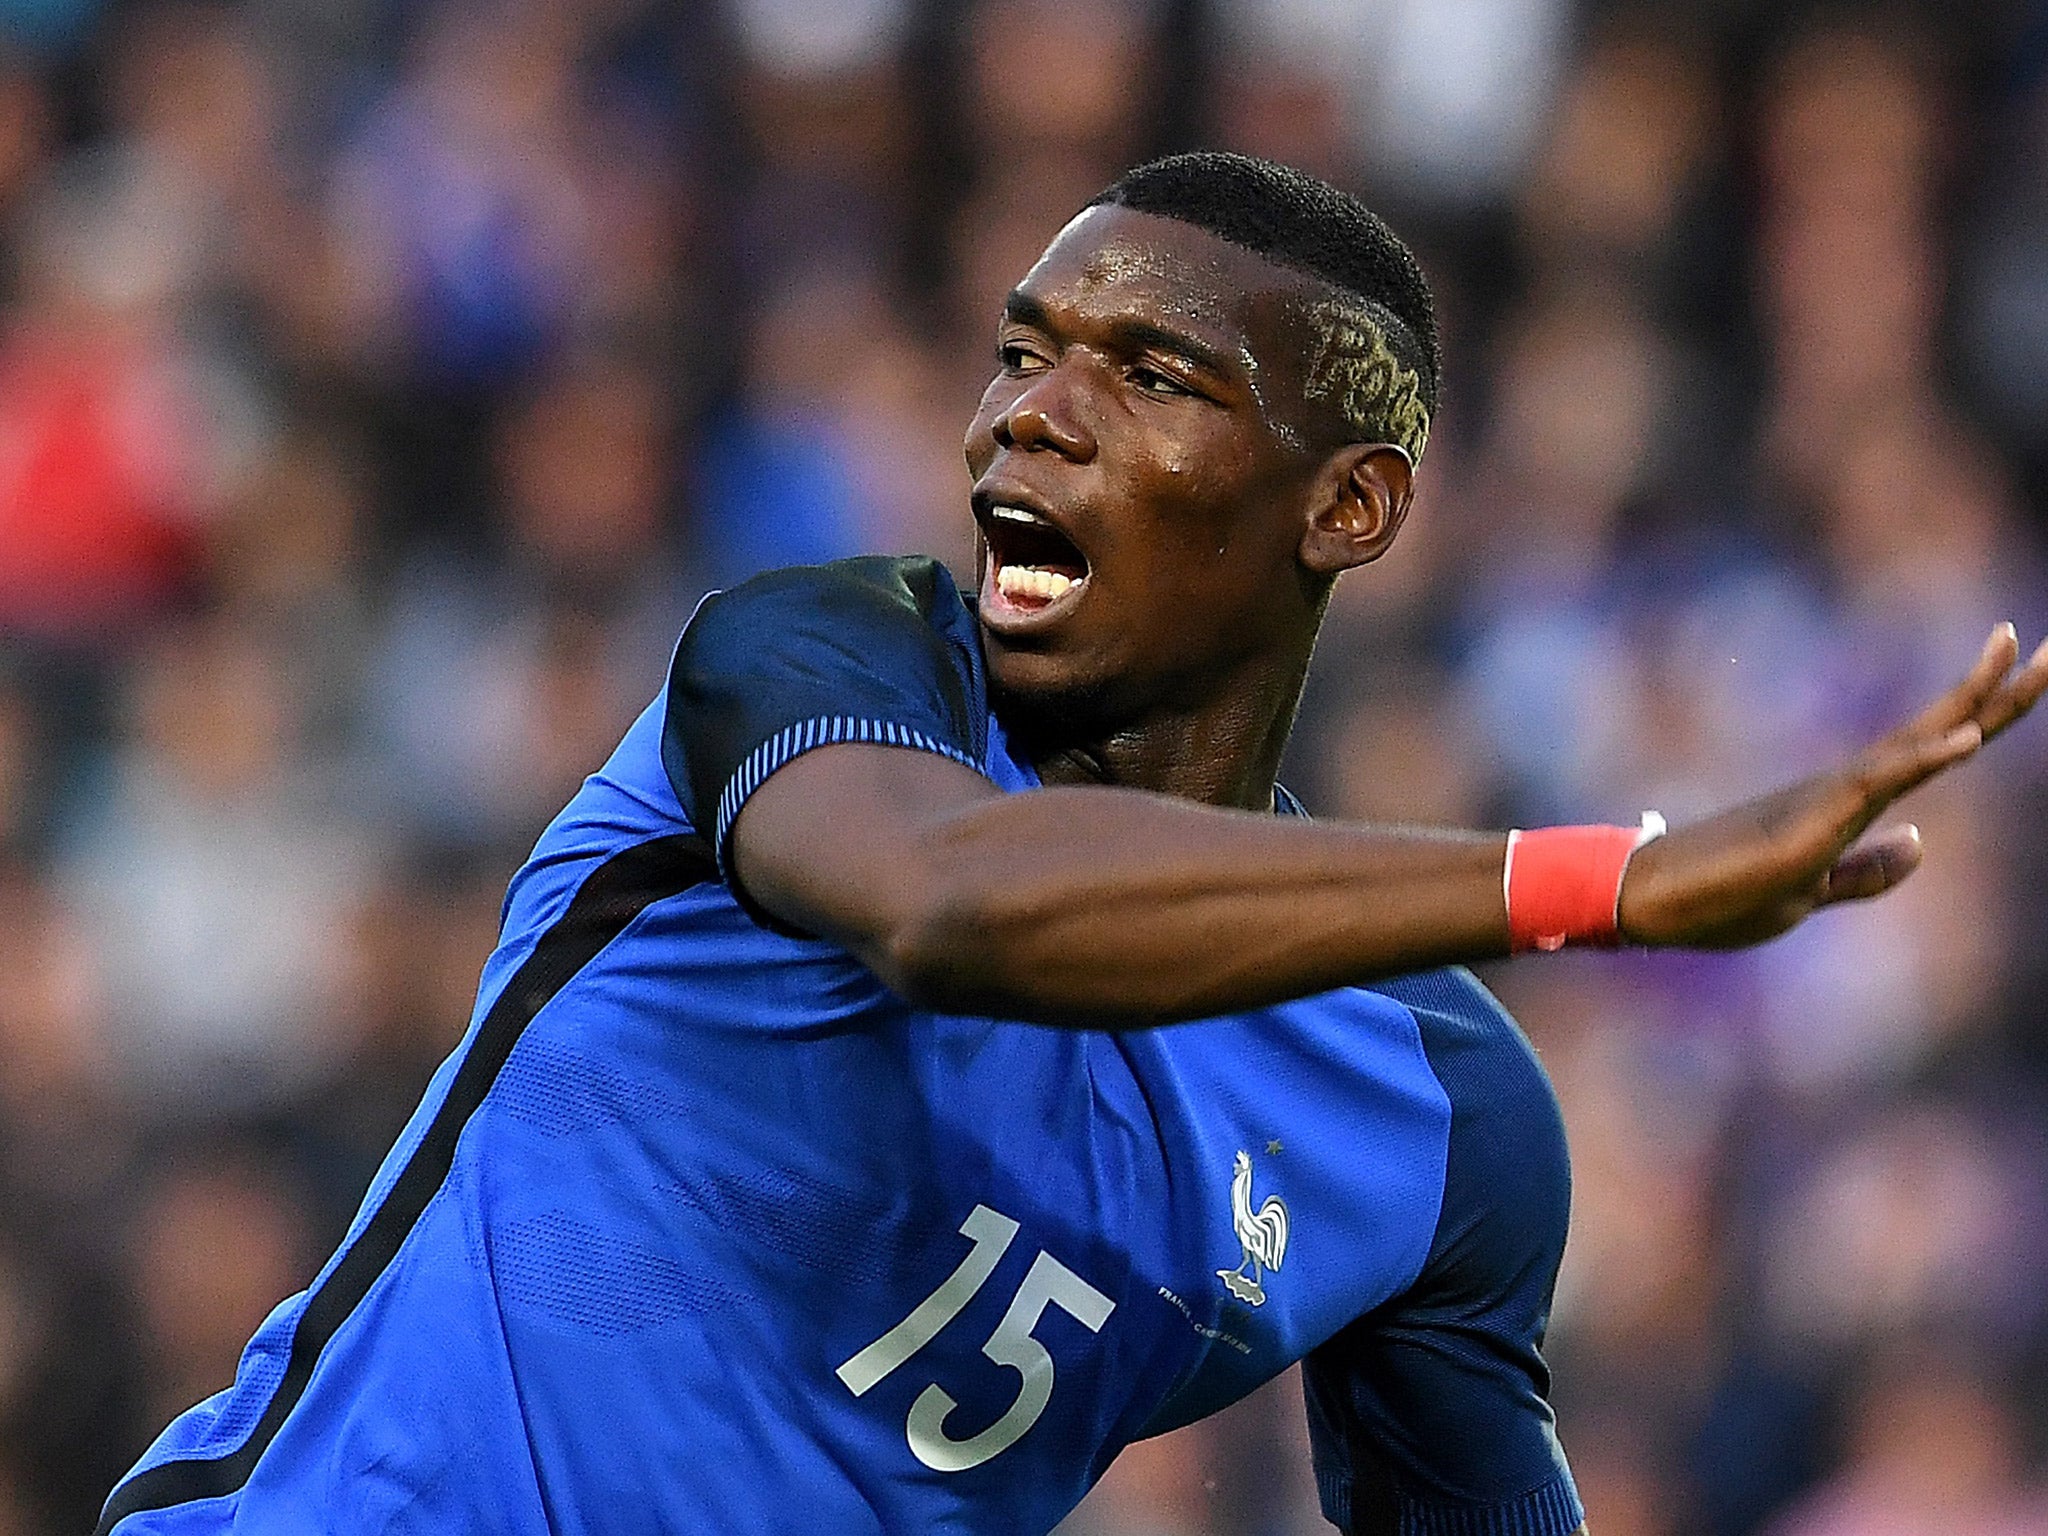 Paul Pogba could light up the Euros for France